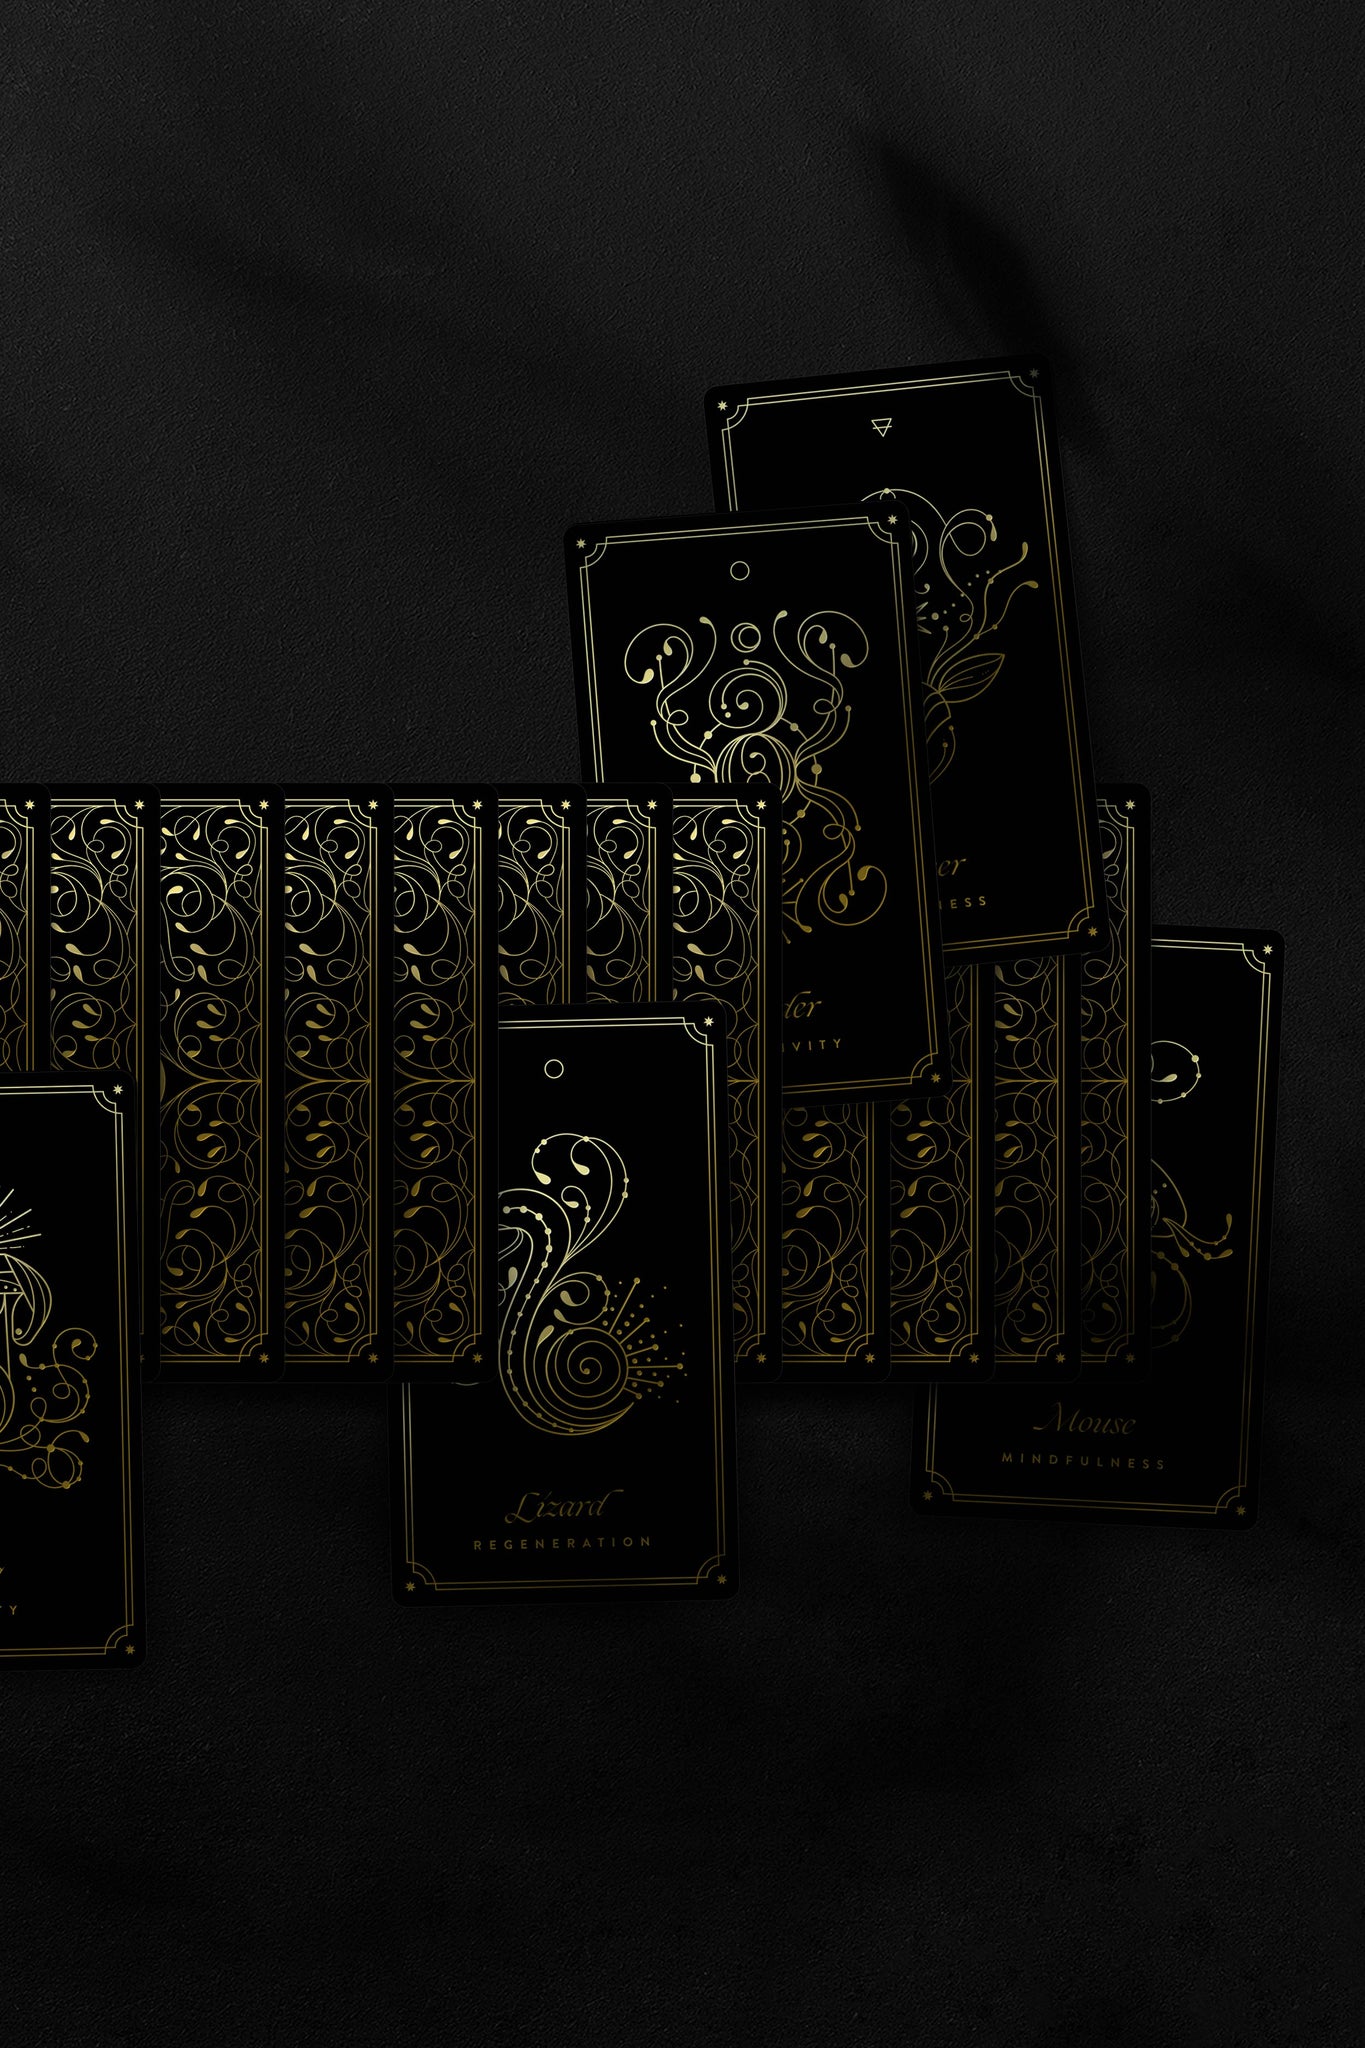 Cosmic Wild Oracle deck with animals by Cocorrina & Co in black and gold